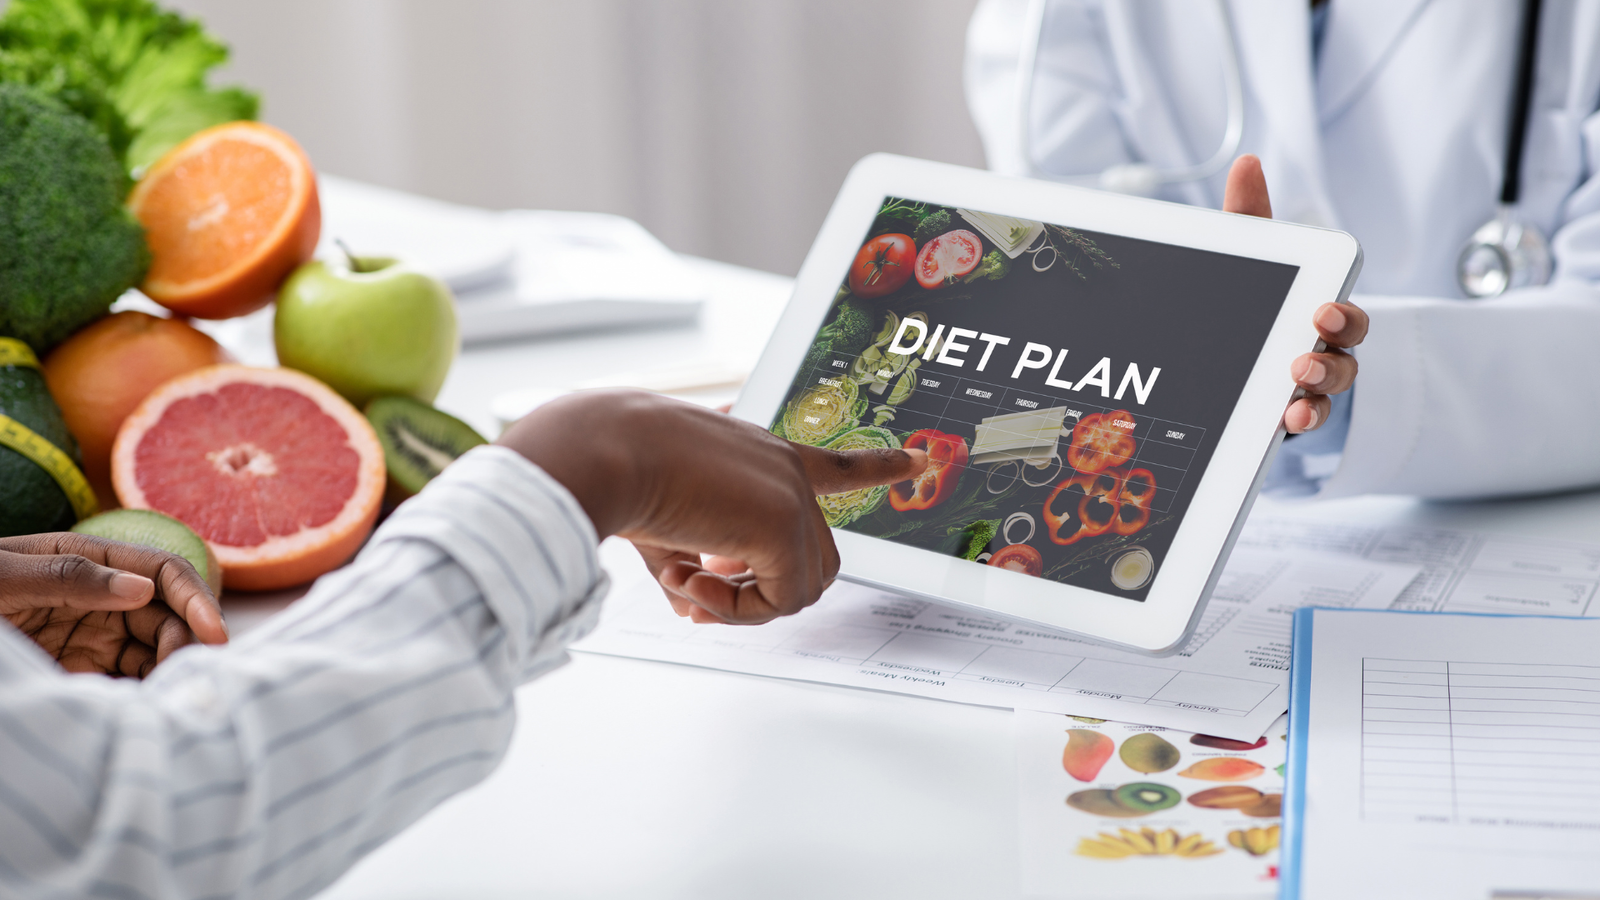 6 THINGS YOU NEED TO KNOW WHEN STARTING A NEW DIET PLAN